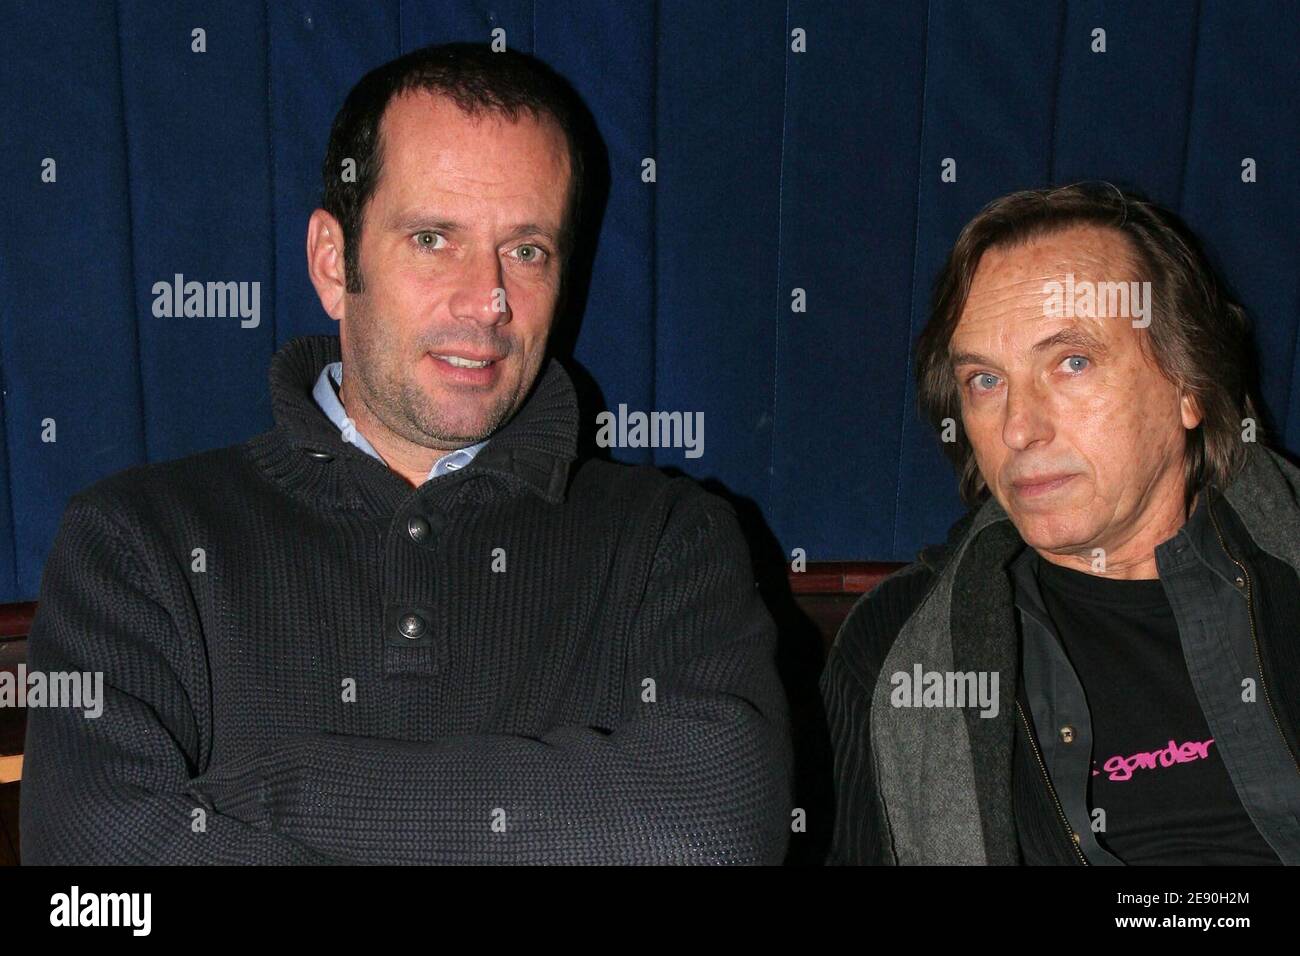 EXCLUSIVE - Christian Vadim and Director Alexandre Arcadi attend the 'Gone Baby Gone' premiere held at Planet Hollywood Restaurant, in Paris, France, on December 10, 2007. Photo by Benoit Pinguet/ABACAPRESS.COM Stock Photo